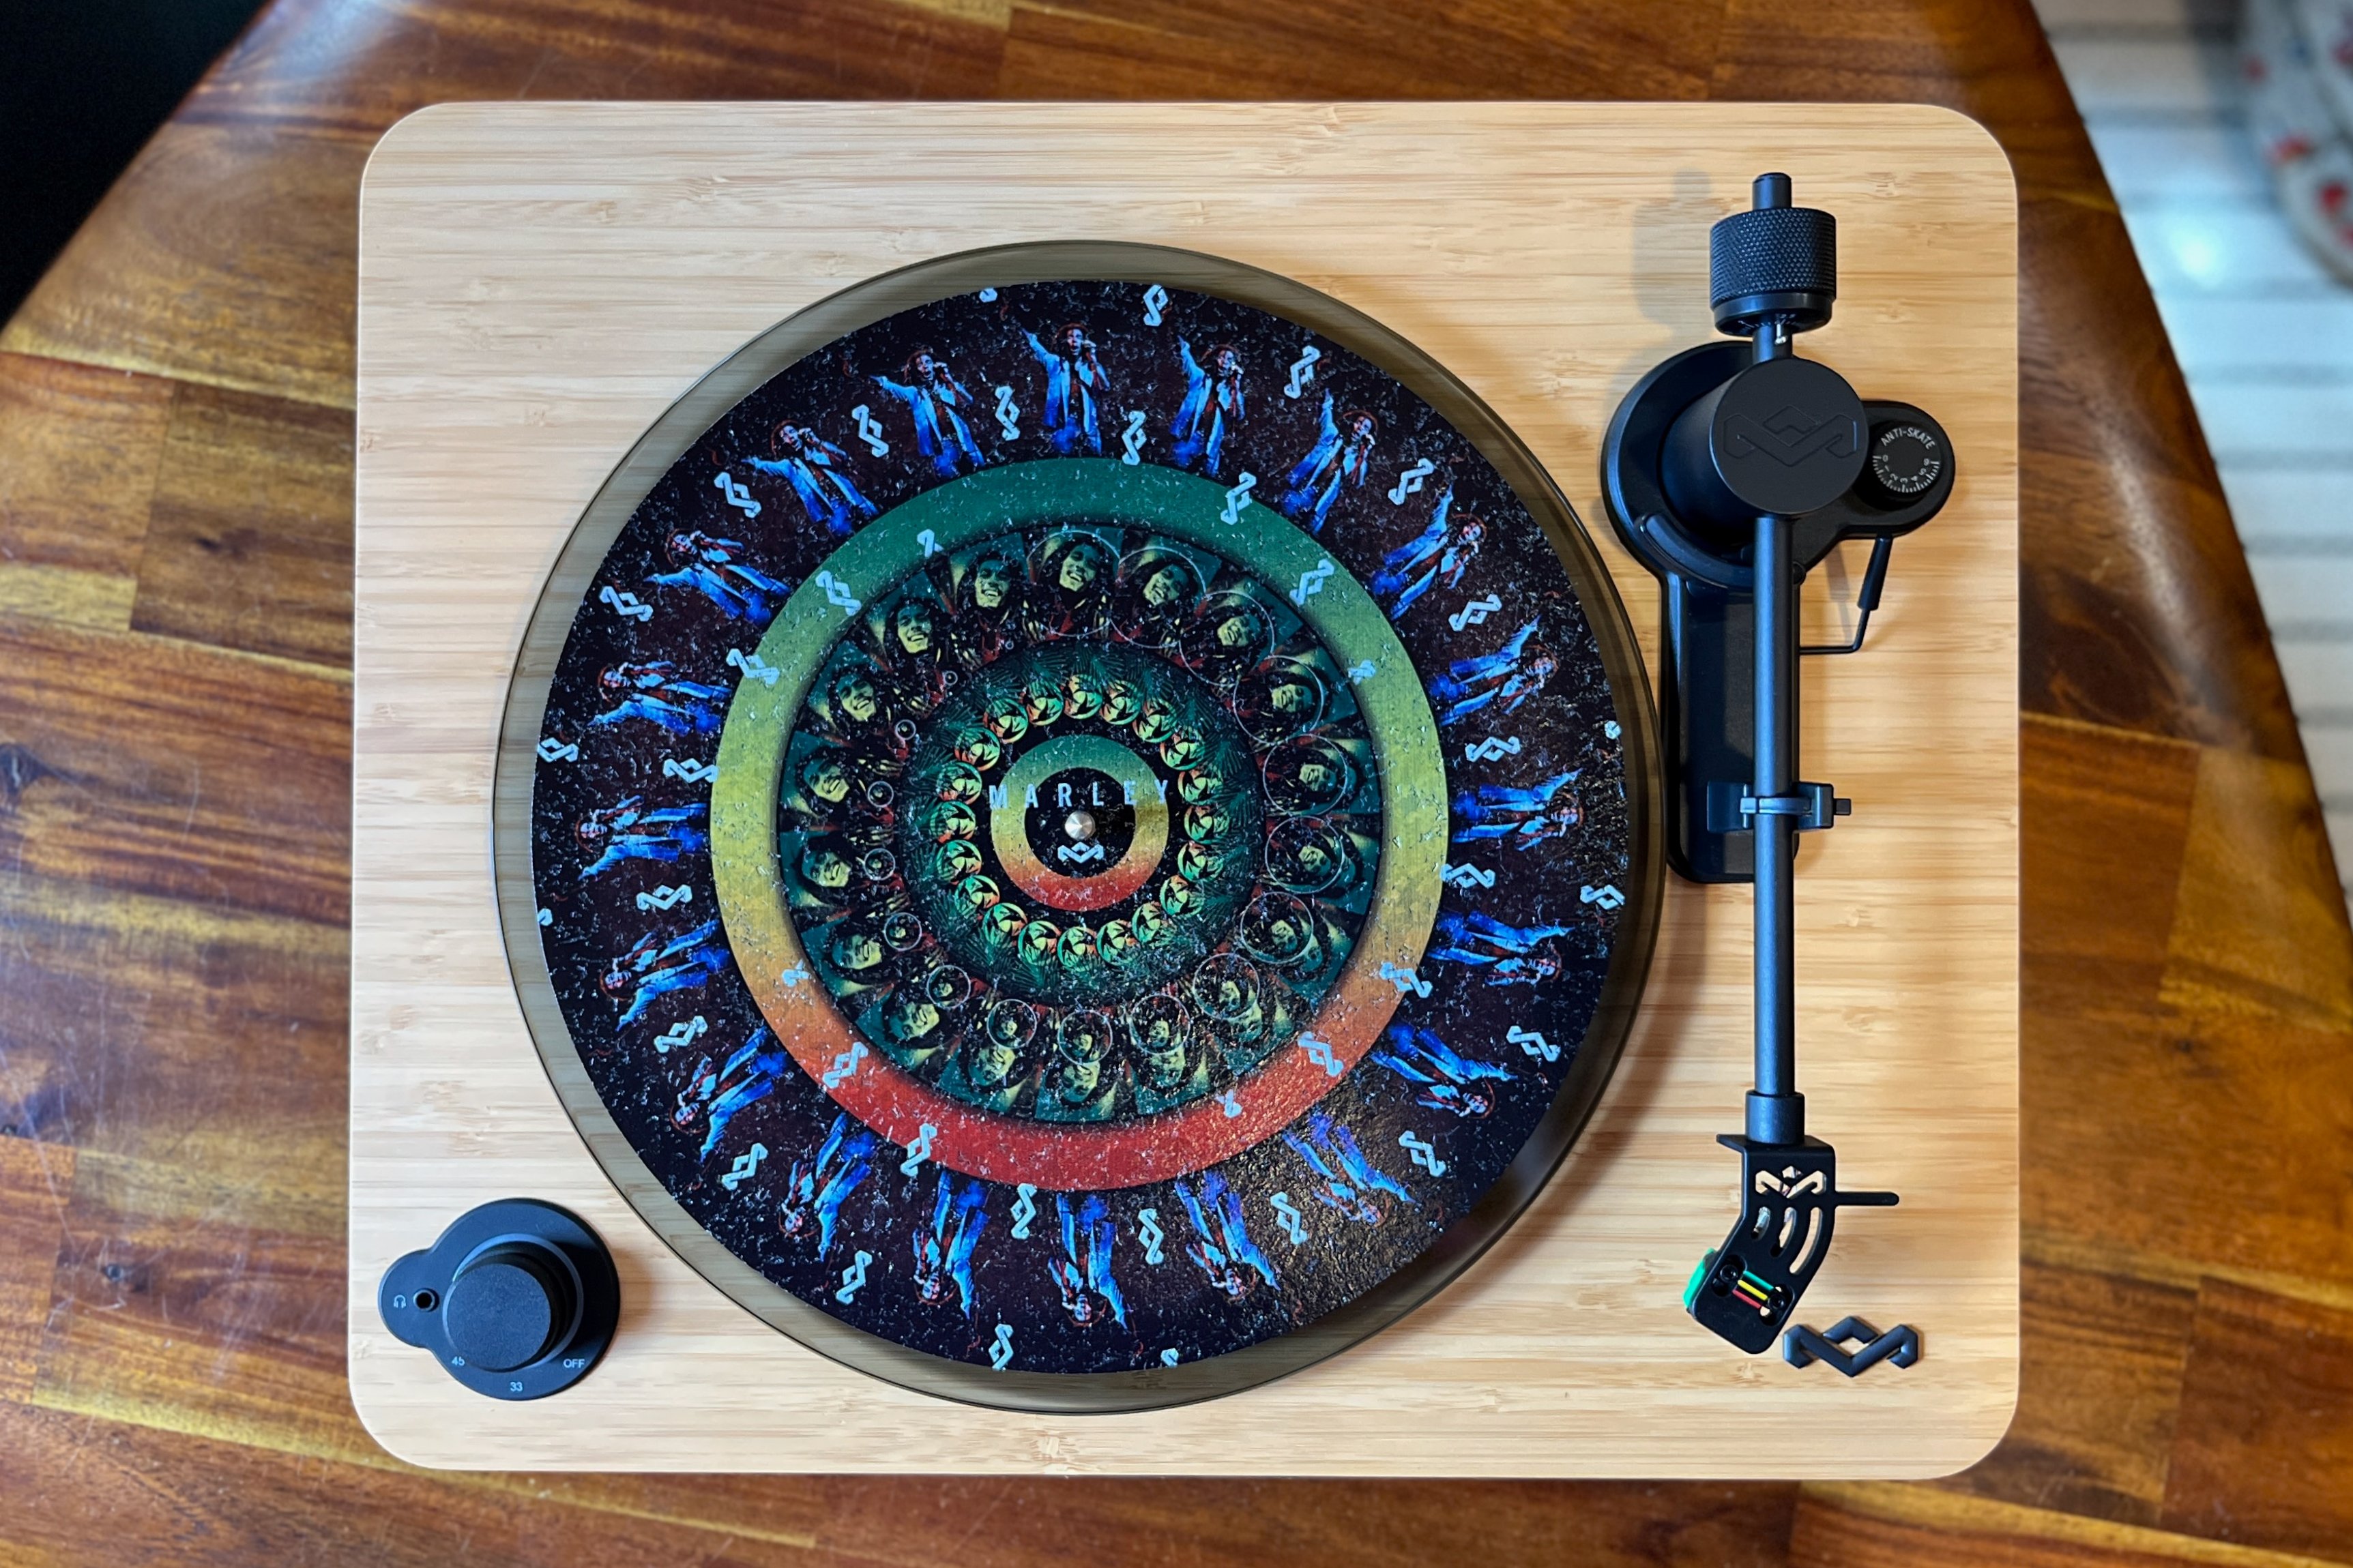 The House of Marley Stir It Up Lux Bluetooth turntable with the zoetrope slip mat.